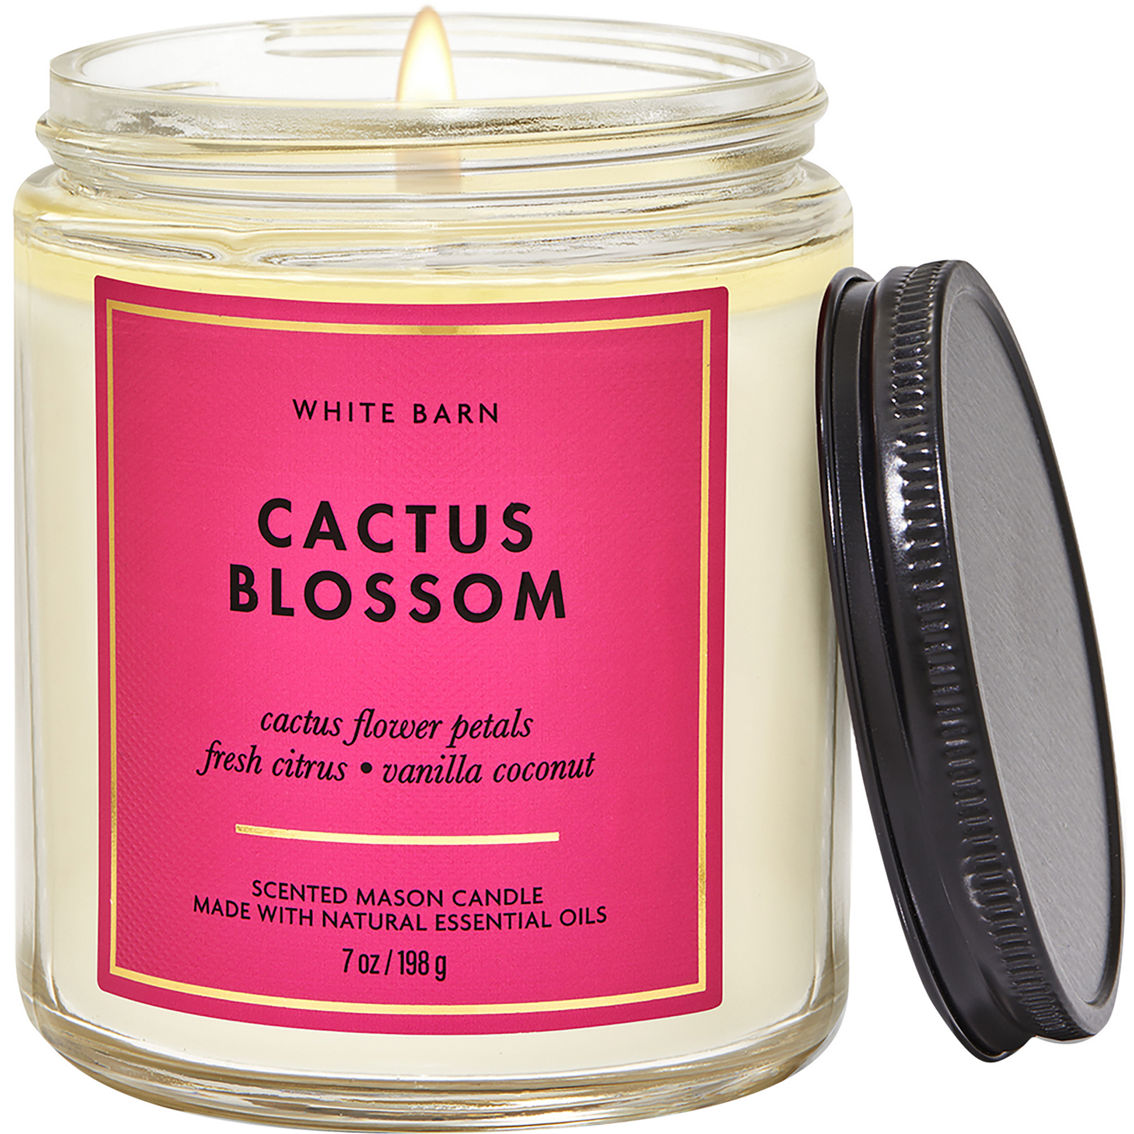 Bath & Body Works Home Cactus Blossom 2 Pc. Gift Set, Candles & Home  Fragrance, Household